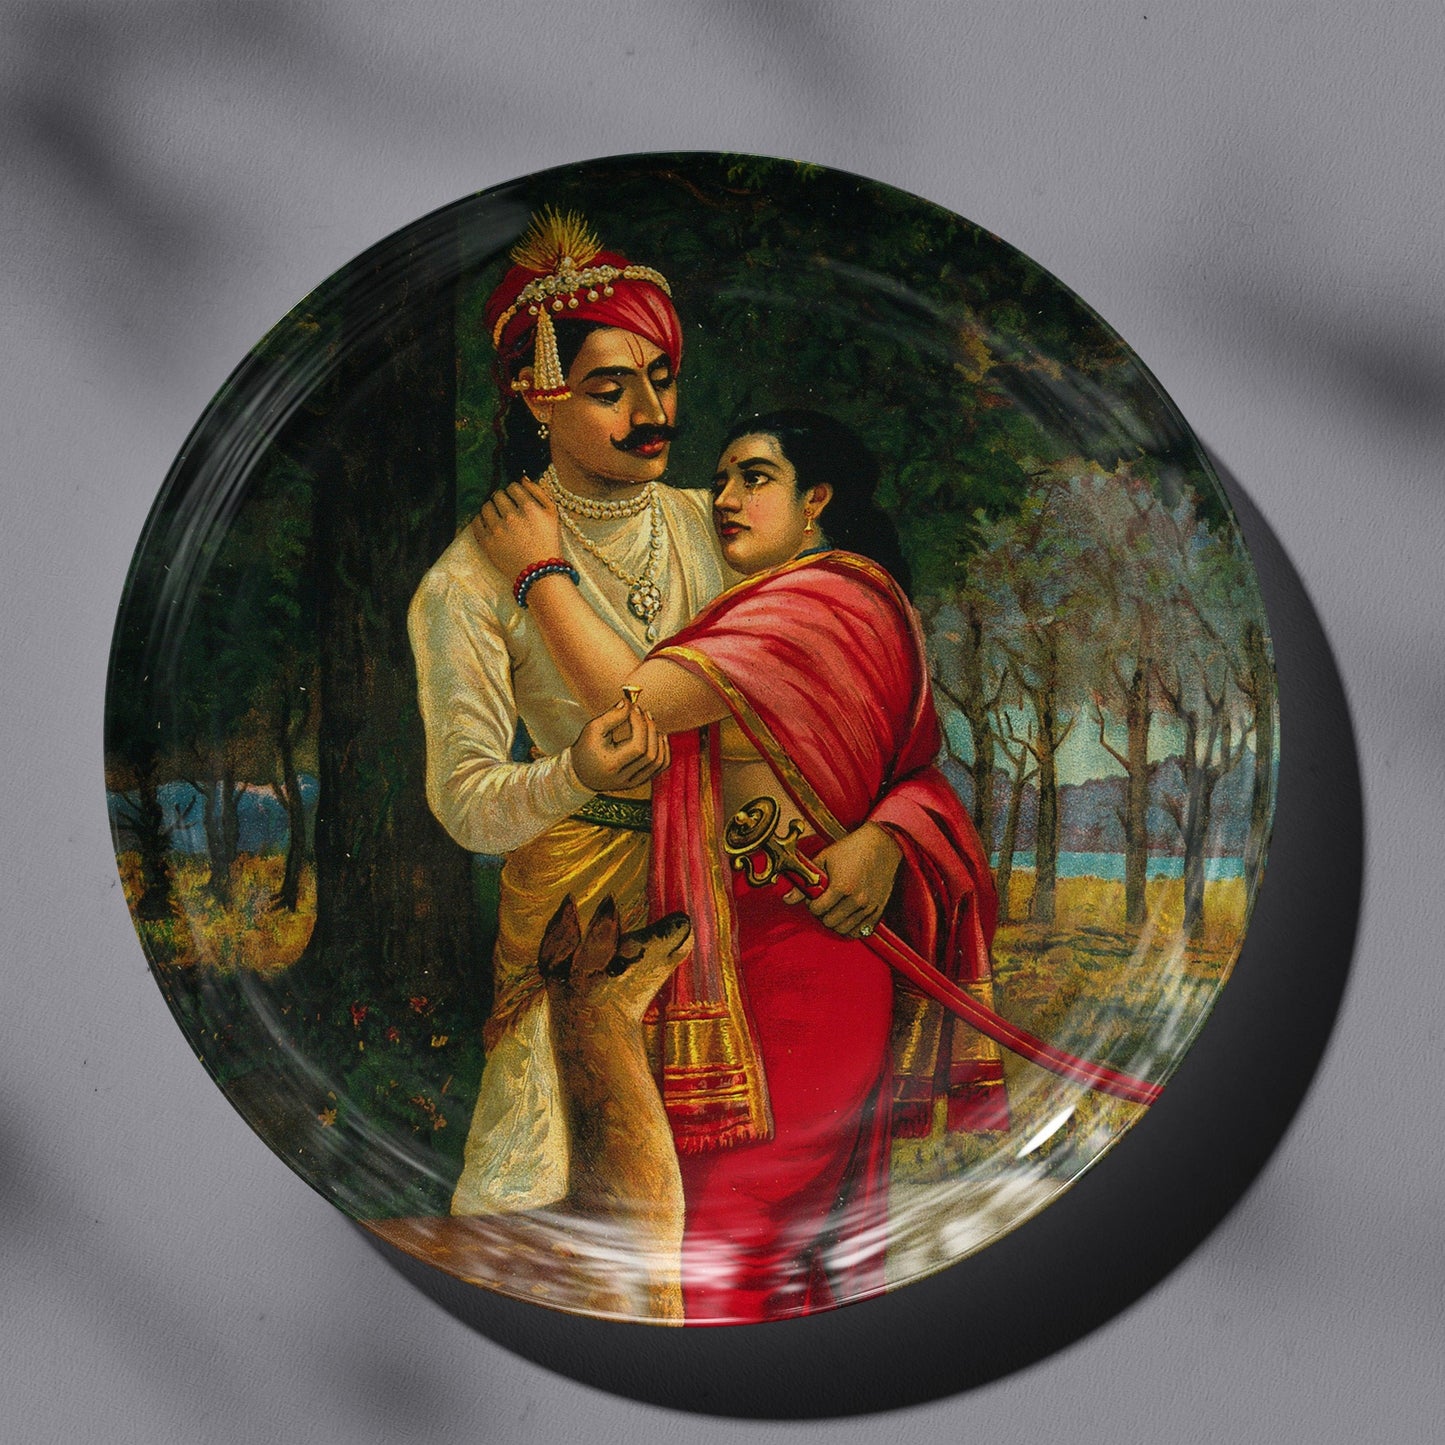 King Dushyanta proposing marriage with a ring to Shakuntala by Ravi Varma Ceramic Plate for Home Decor